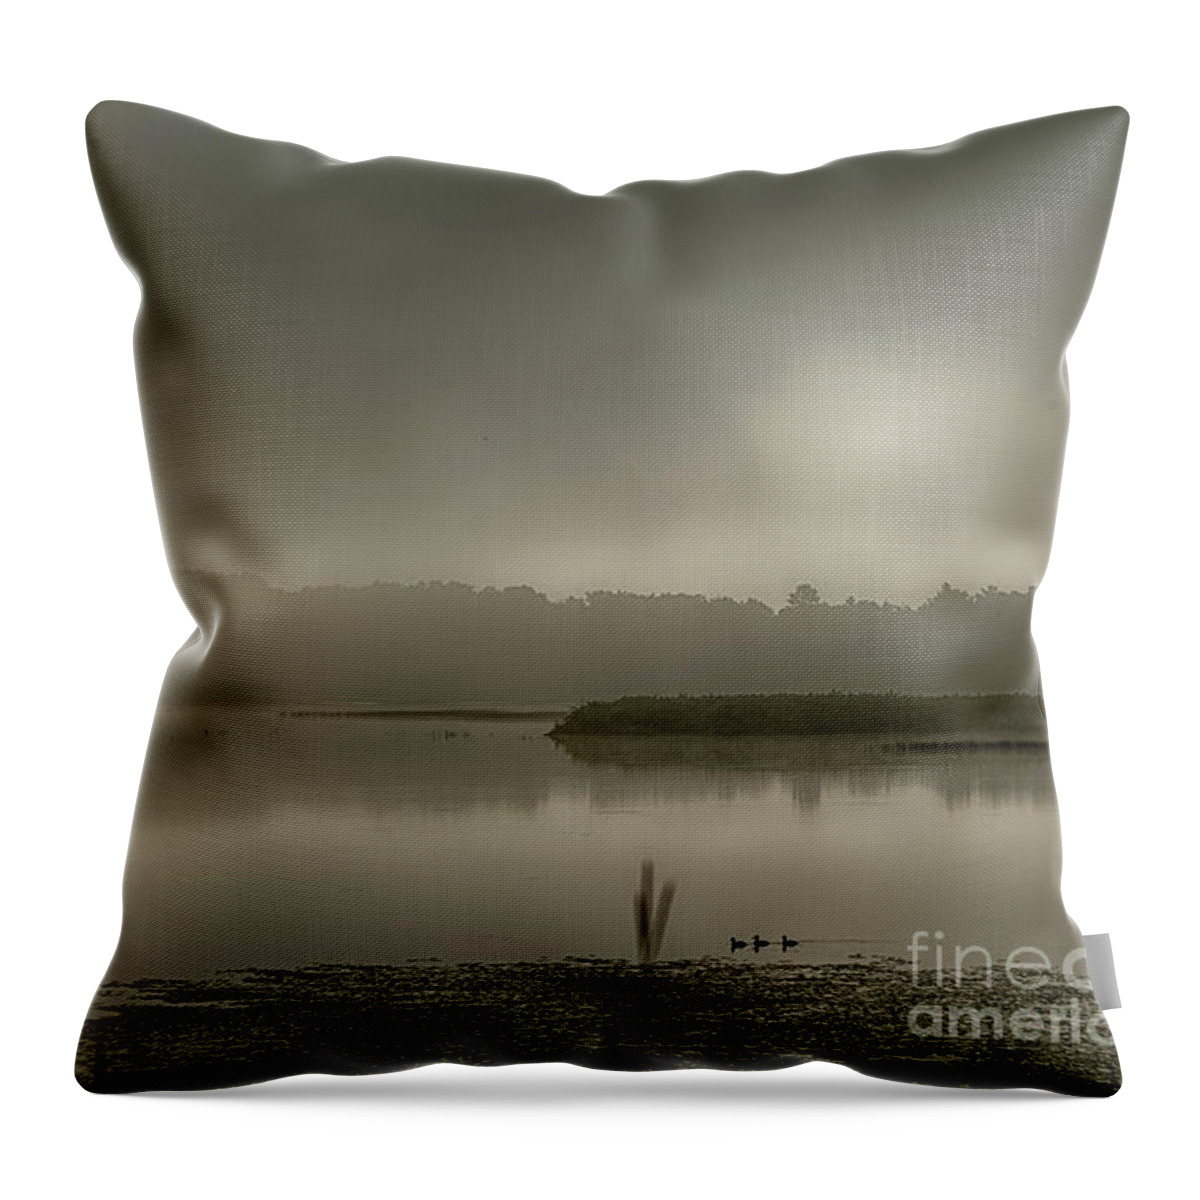  Throw Pillow featuring the photograph Phantom Lake by Natural Focal Point Photography